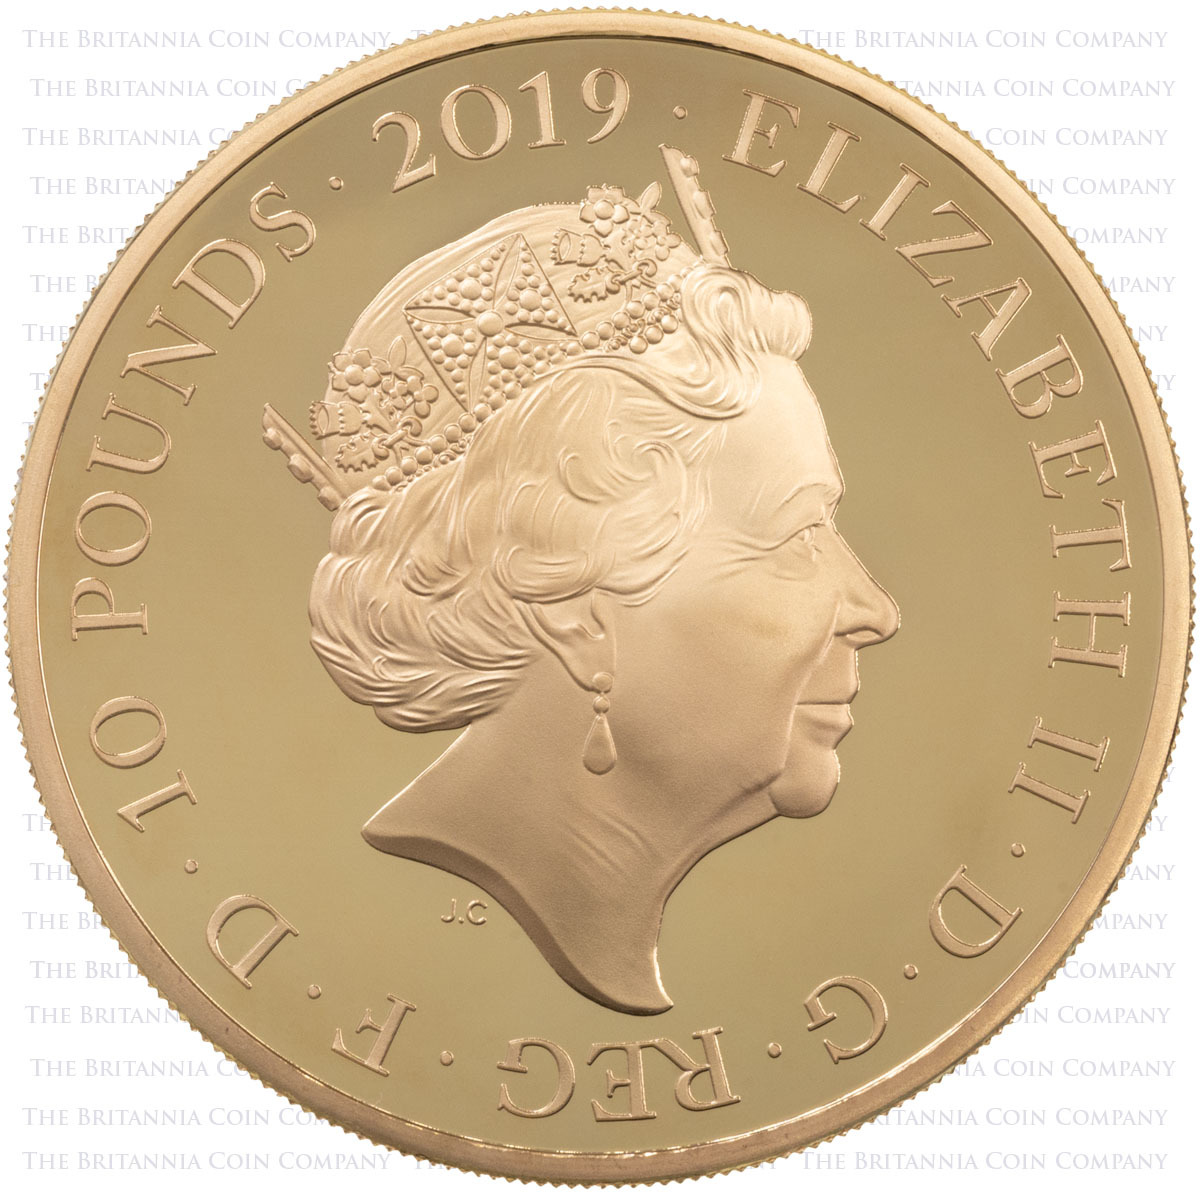 UK19VCG5 2019 Queen Victoria And Prince Albert Five Ounce Gold Proof Coin Obverse